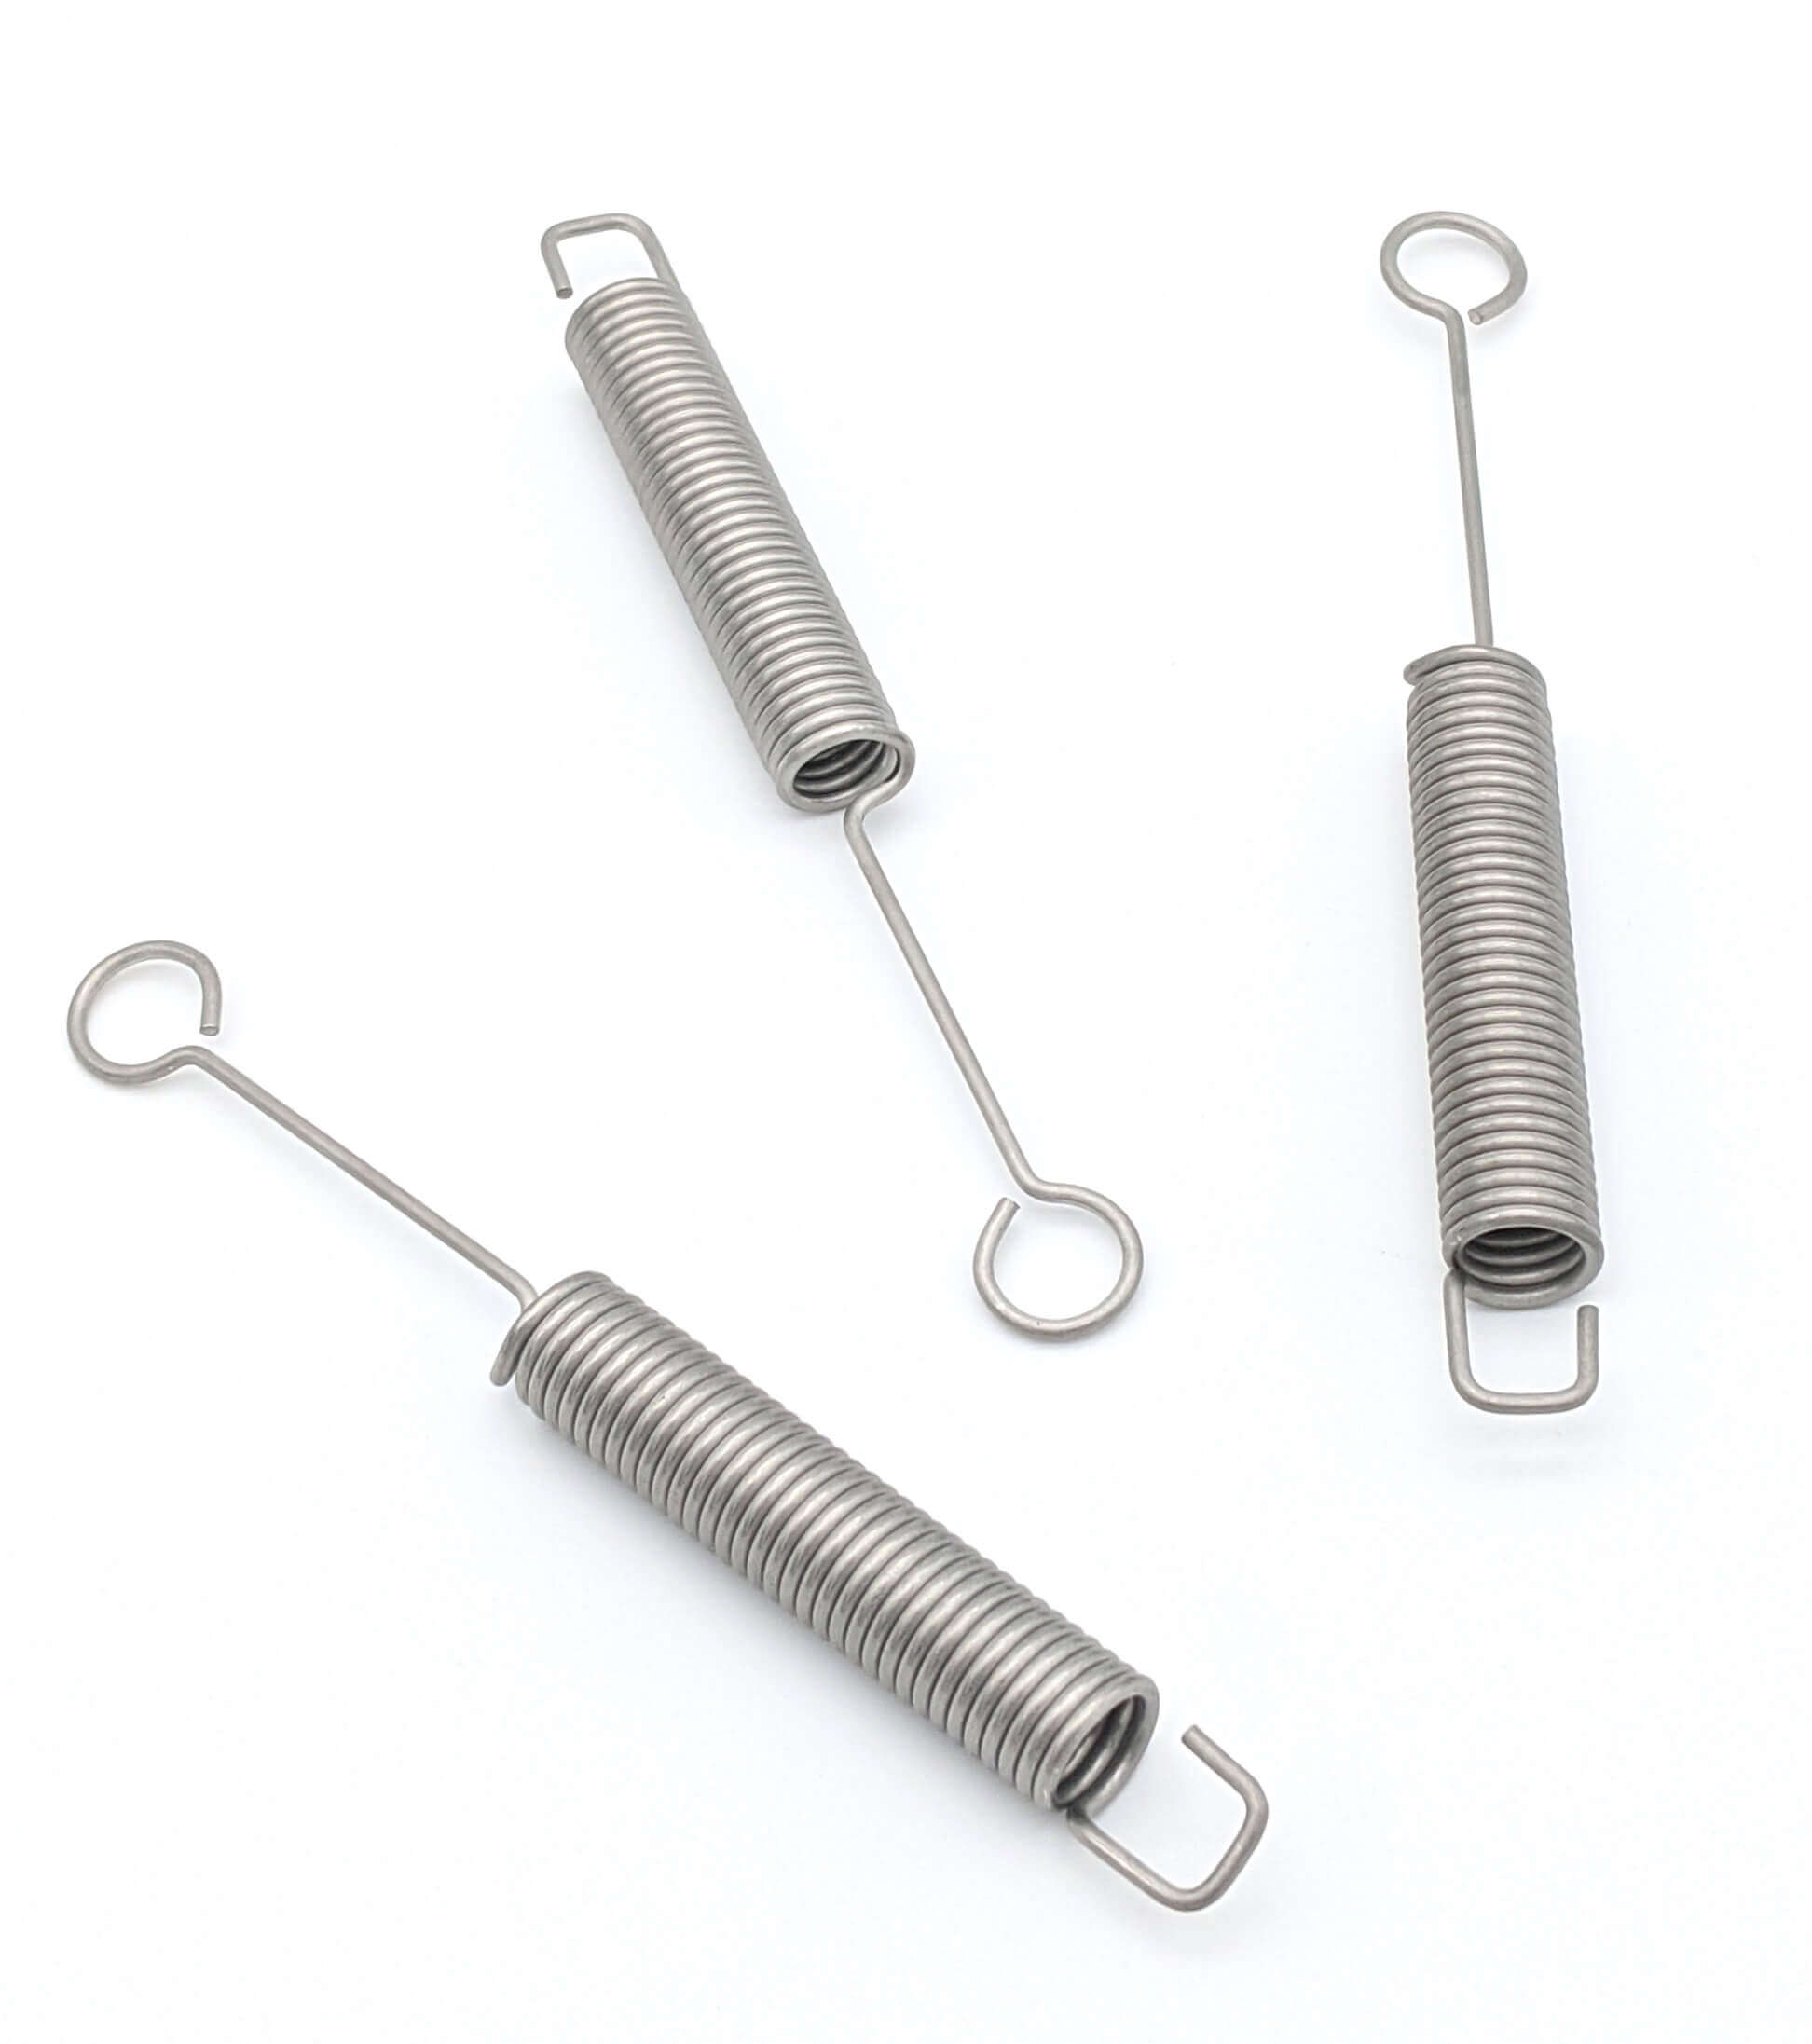 Eyech 200 Pieces Spring Assortment Set Zinc Plated Compression and Extension Springs for Shops and Home Repairs Replacement Kit 